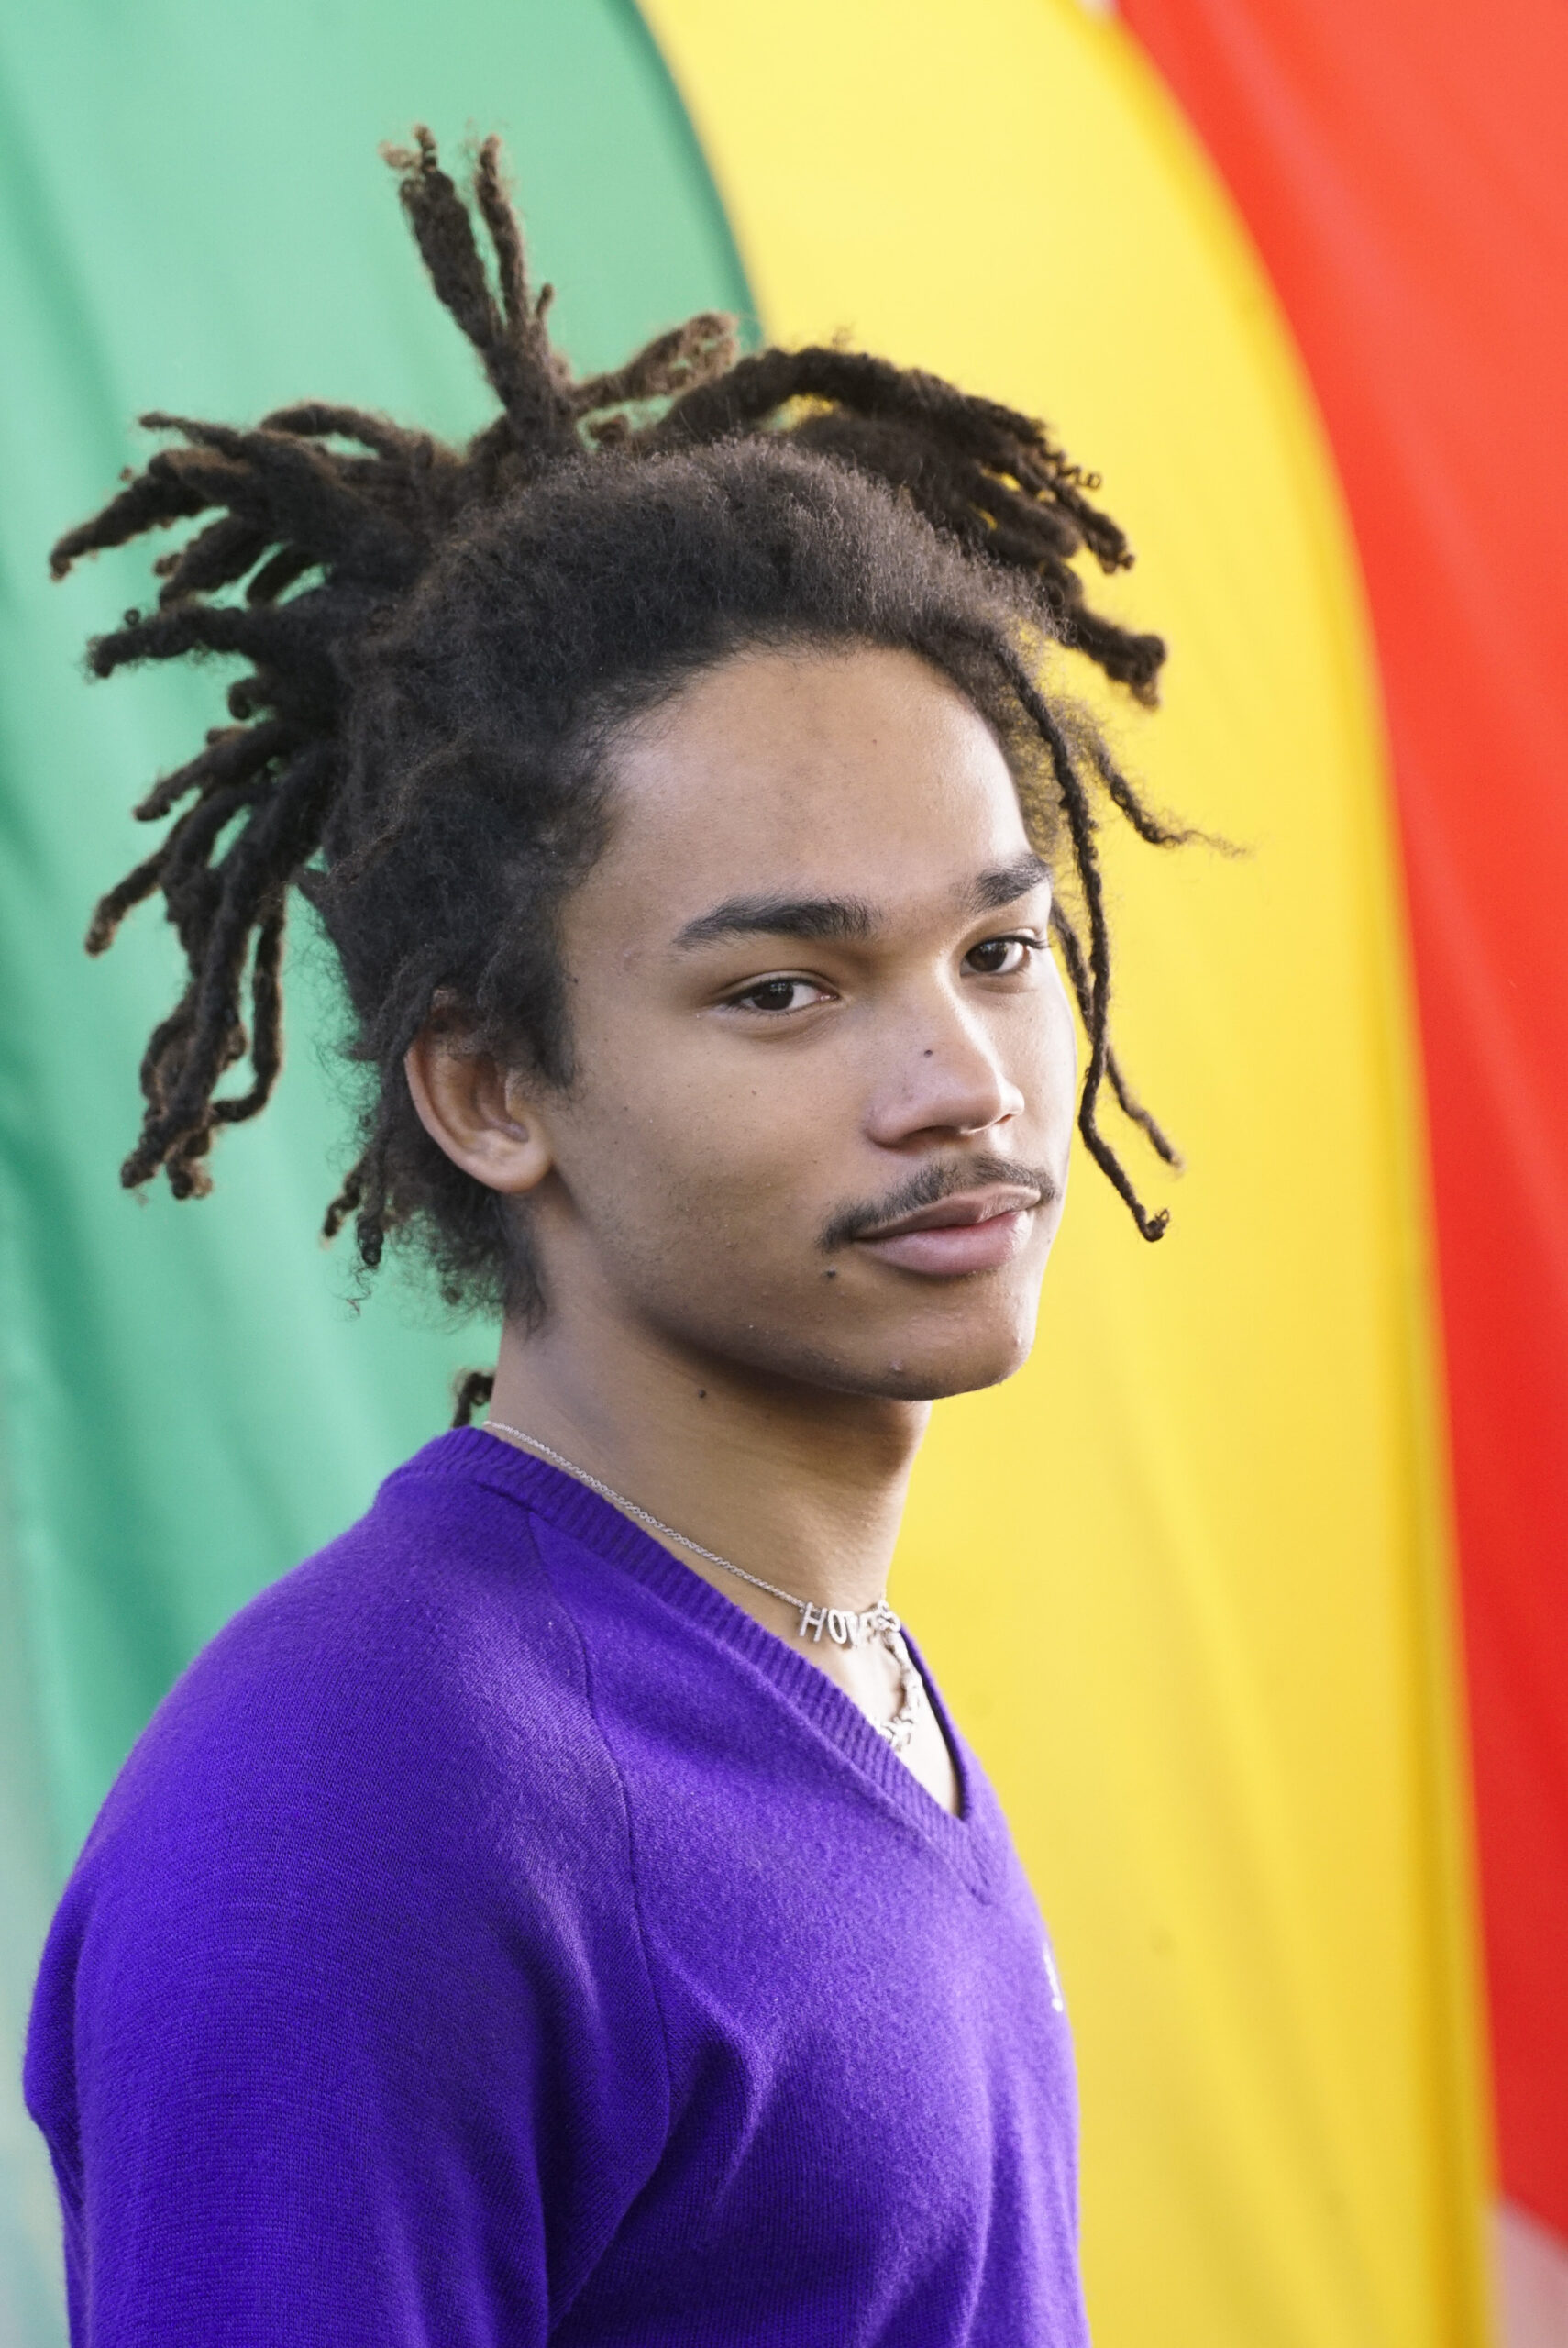 Getting To Know Luka Sabbat: The Rising Star Taking The Entertainment World By Storm